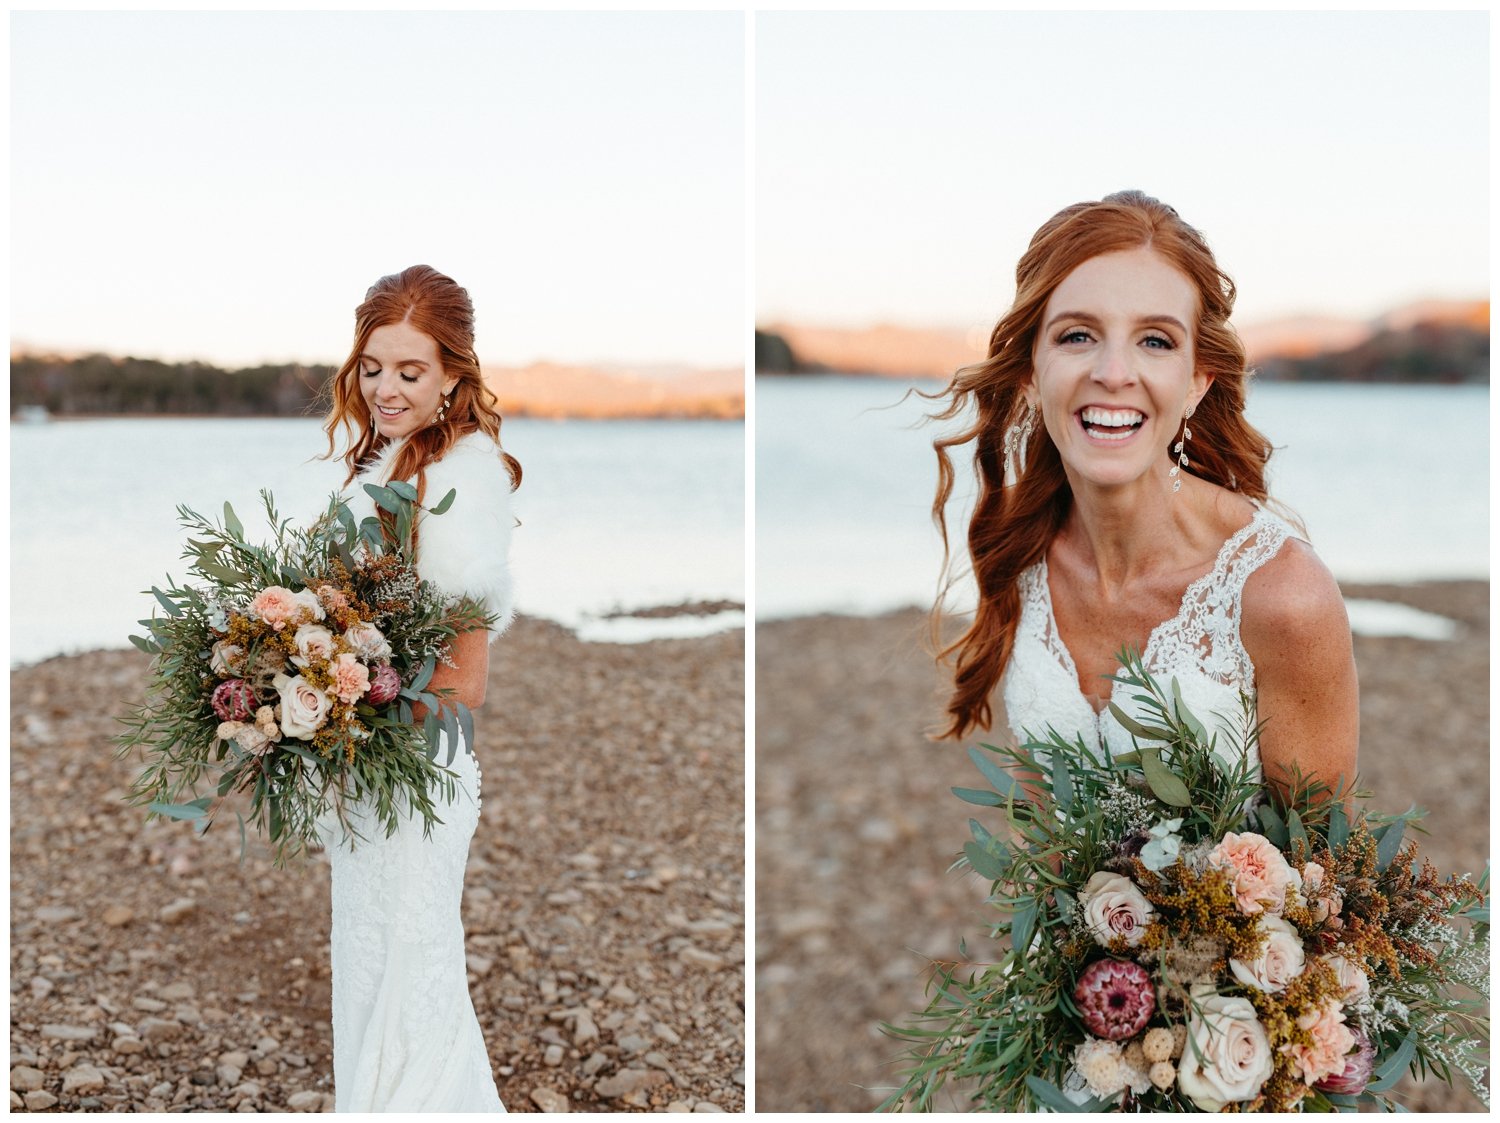 Portraits of the bride beside the lake